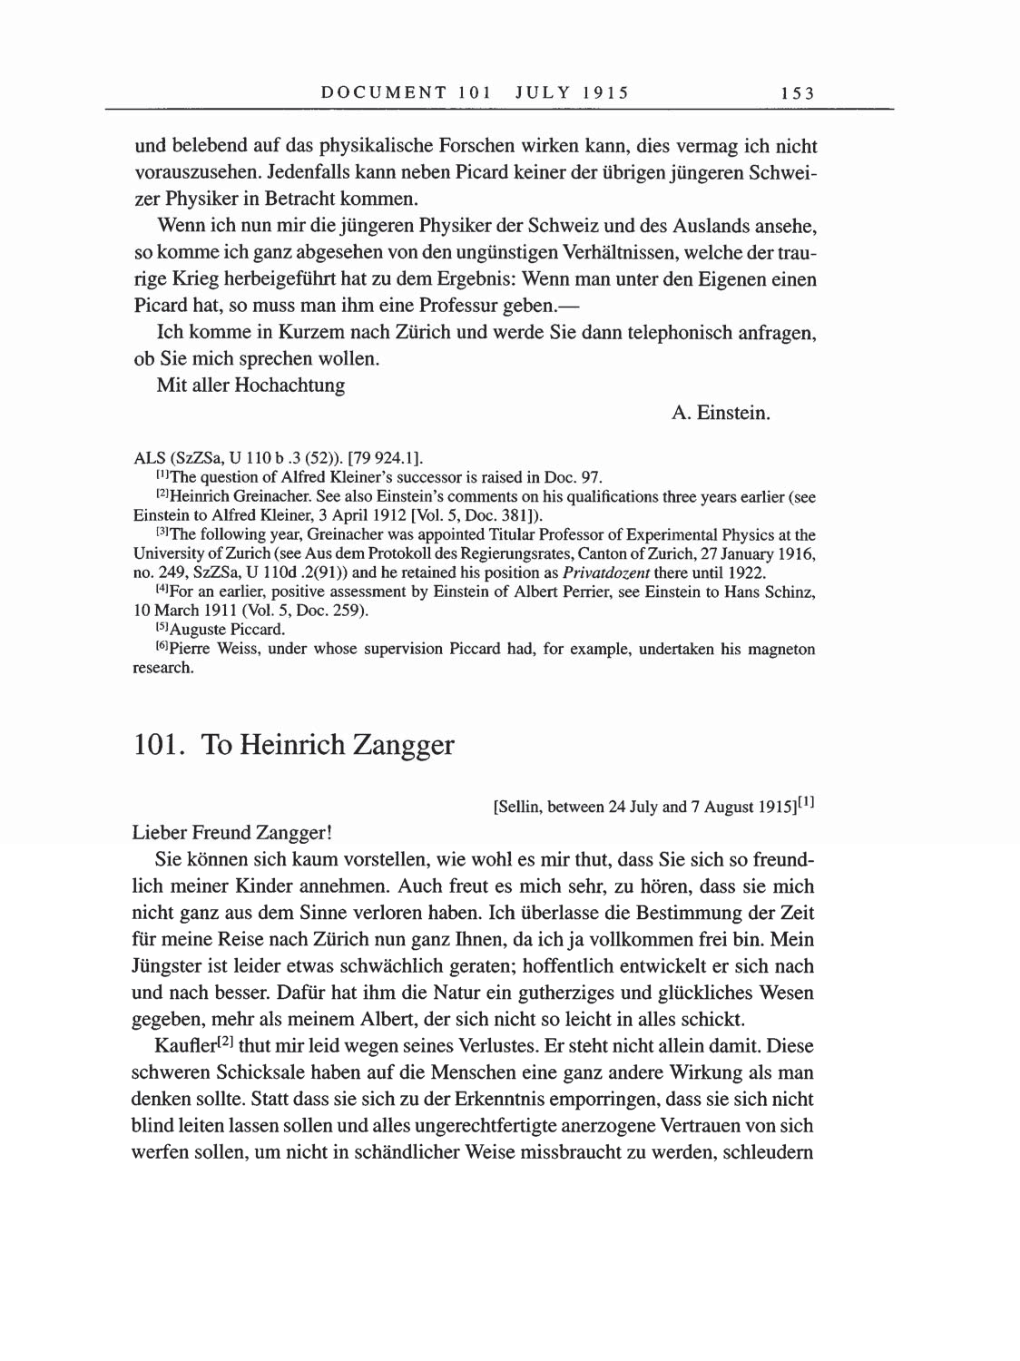 Volume 8, Part A: The Berlin Years: Correspondence 1914-1917 page 153